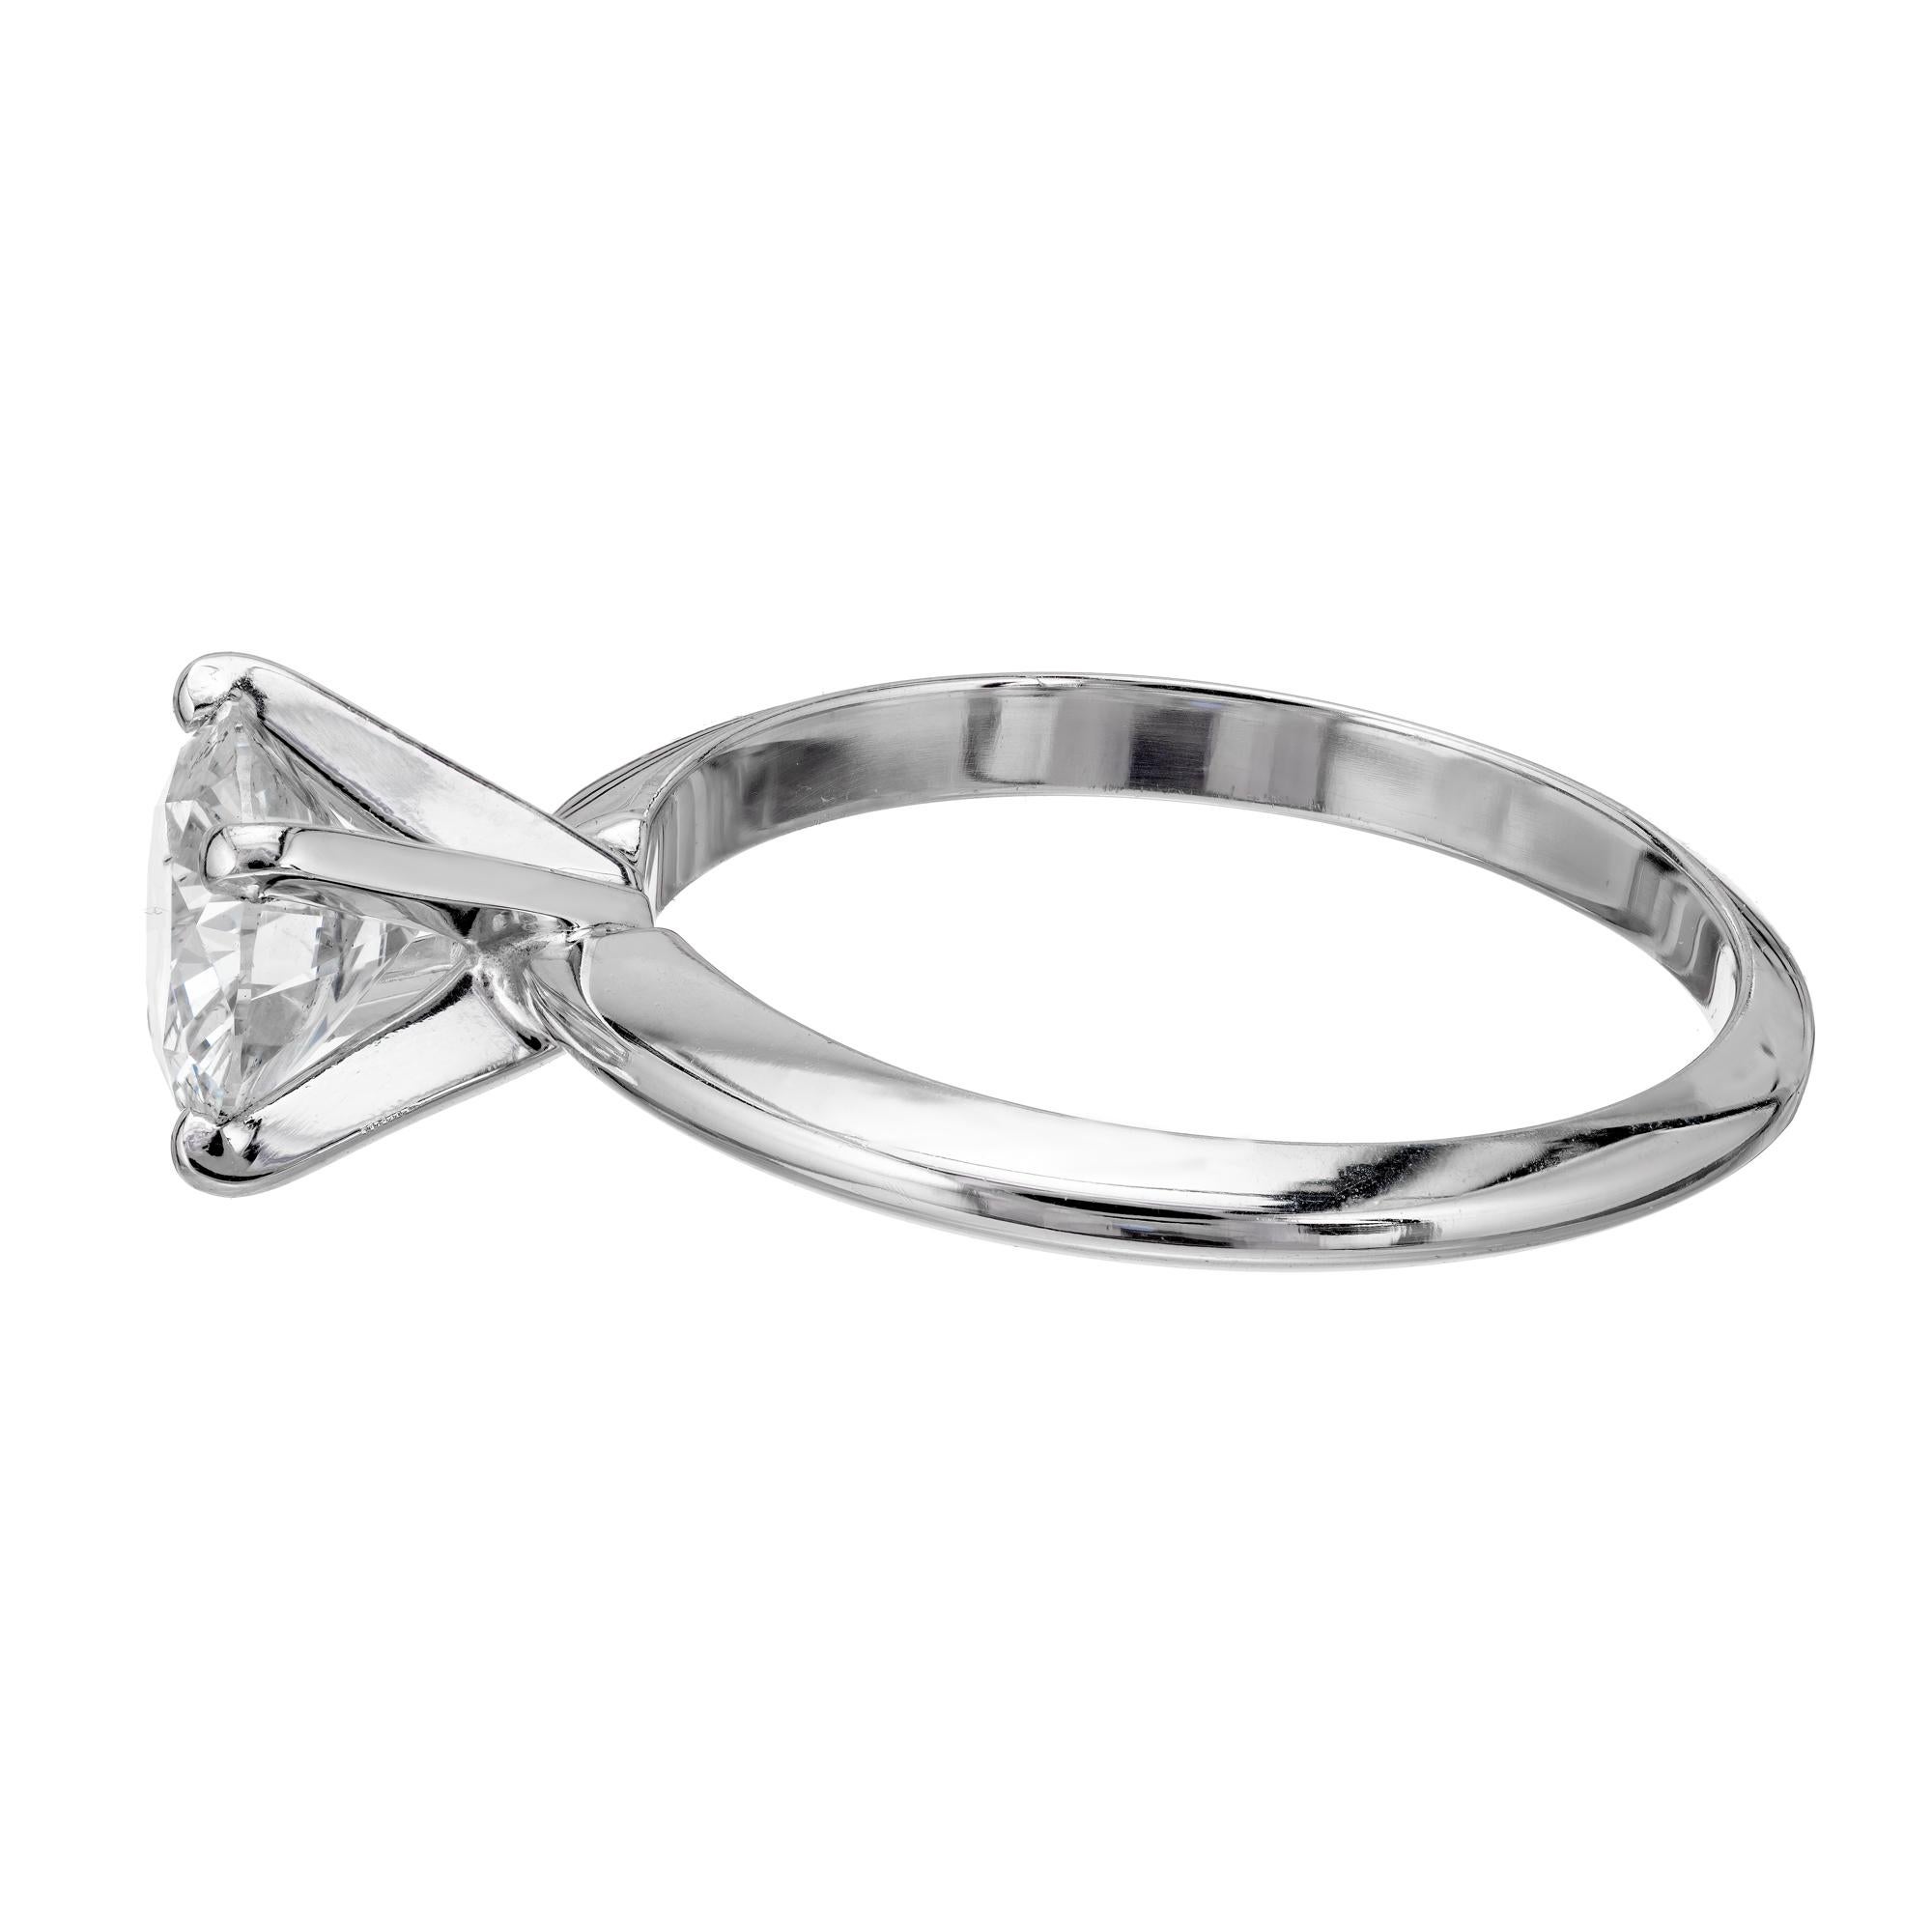 Round Cut Peter Suchy GIA Certified 1.08 Carat Diamond Platinum Solitaire Engagement Ring